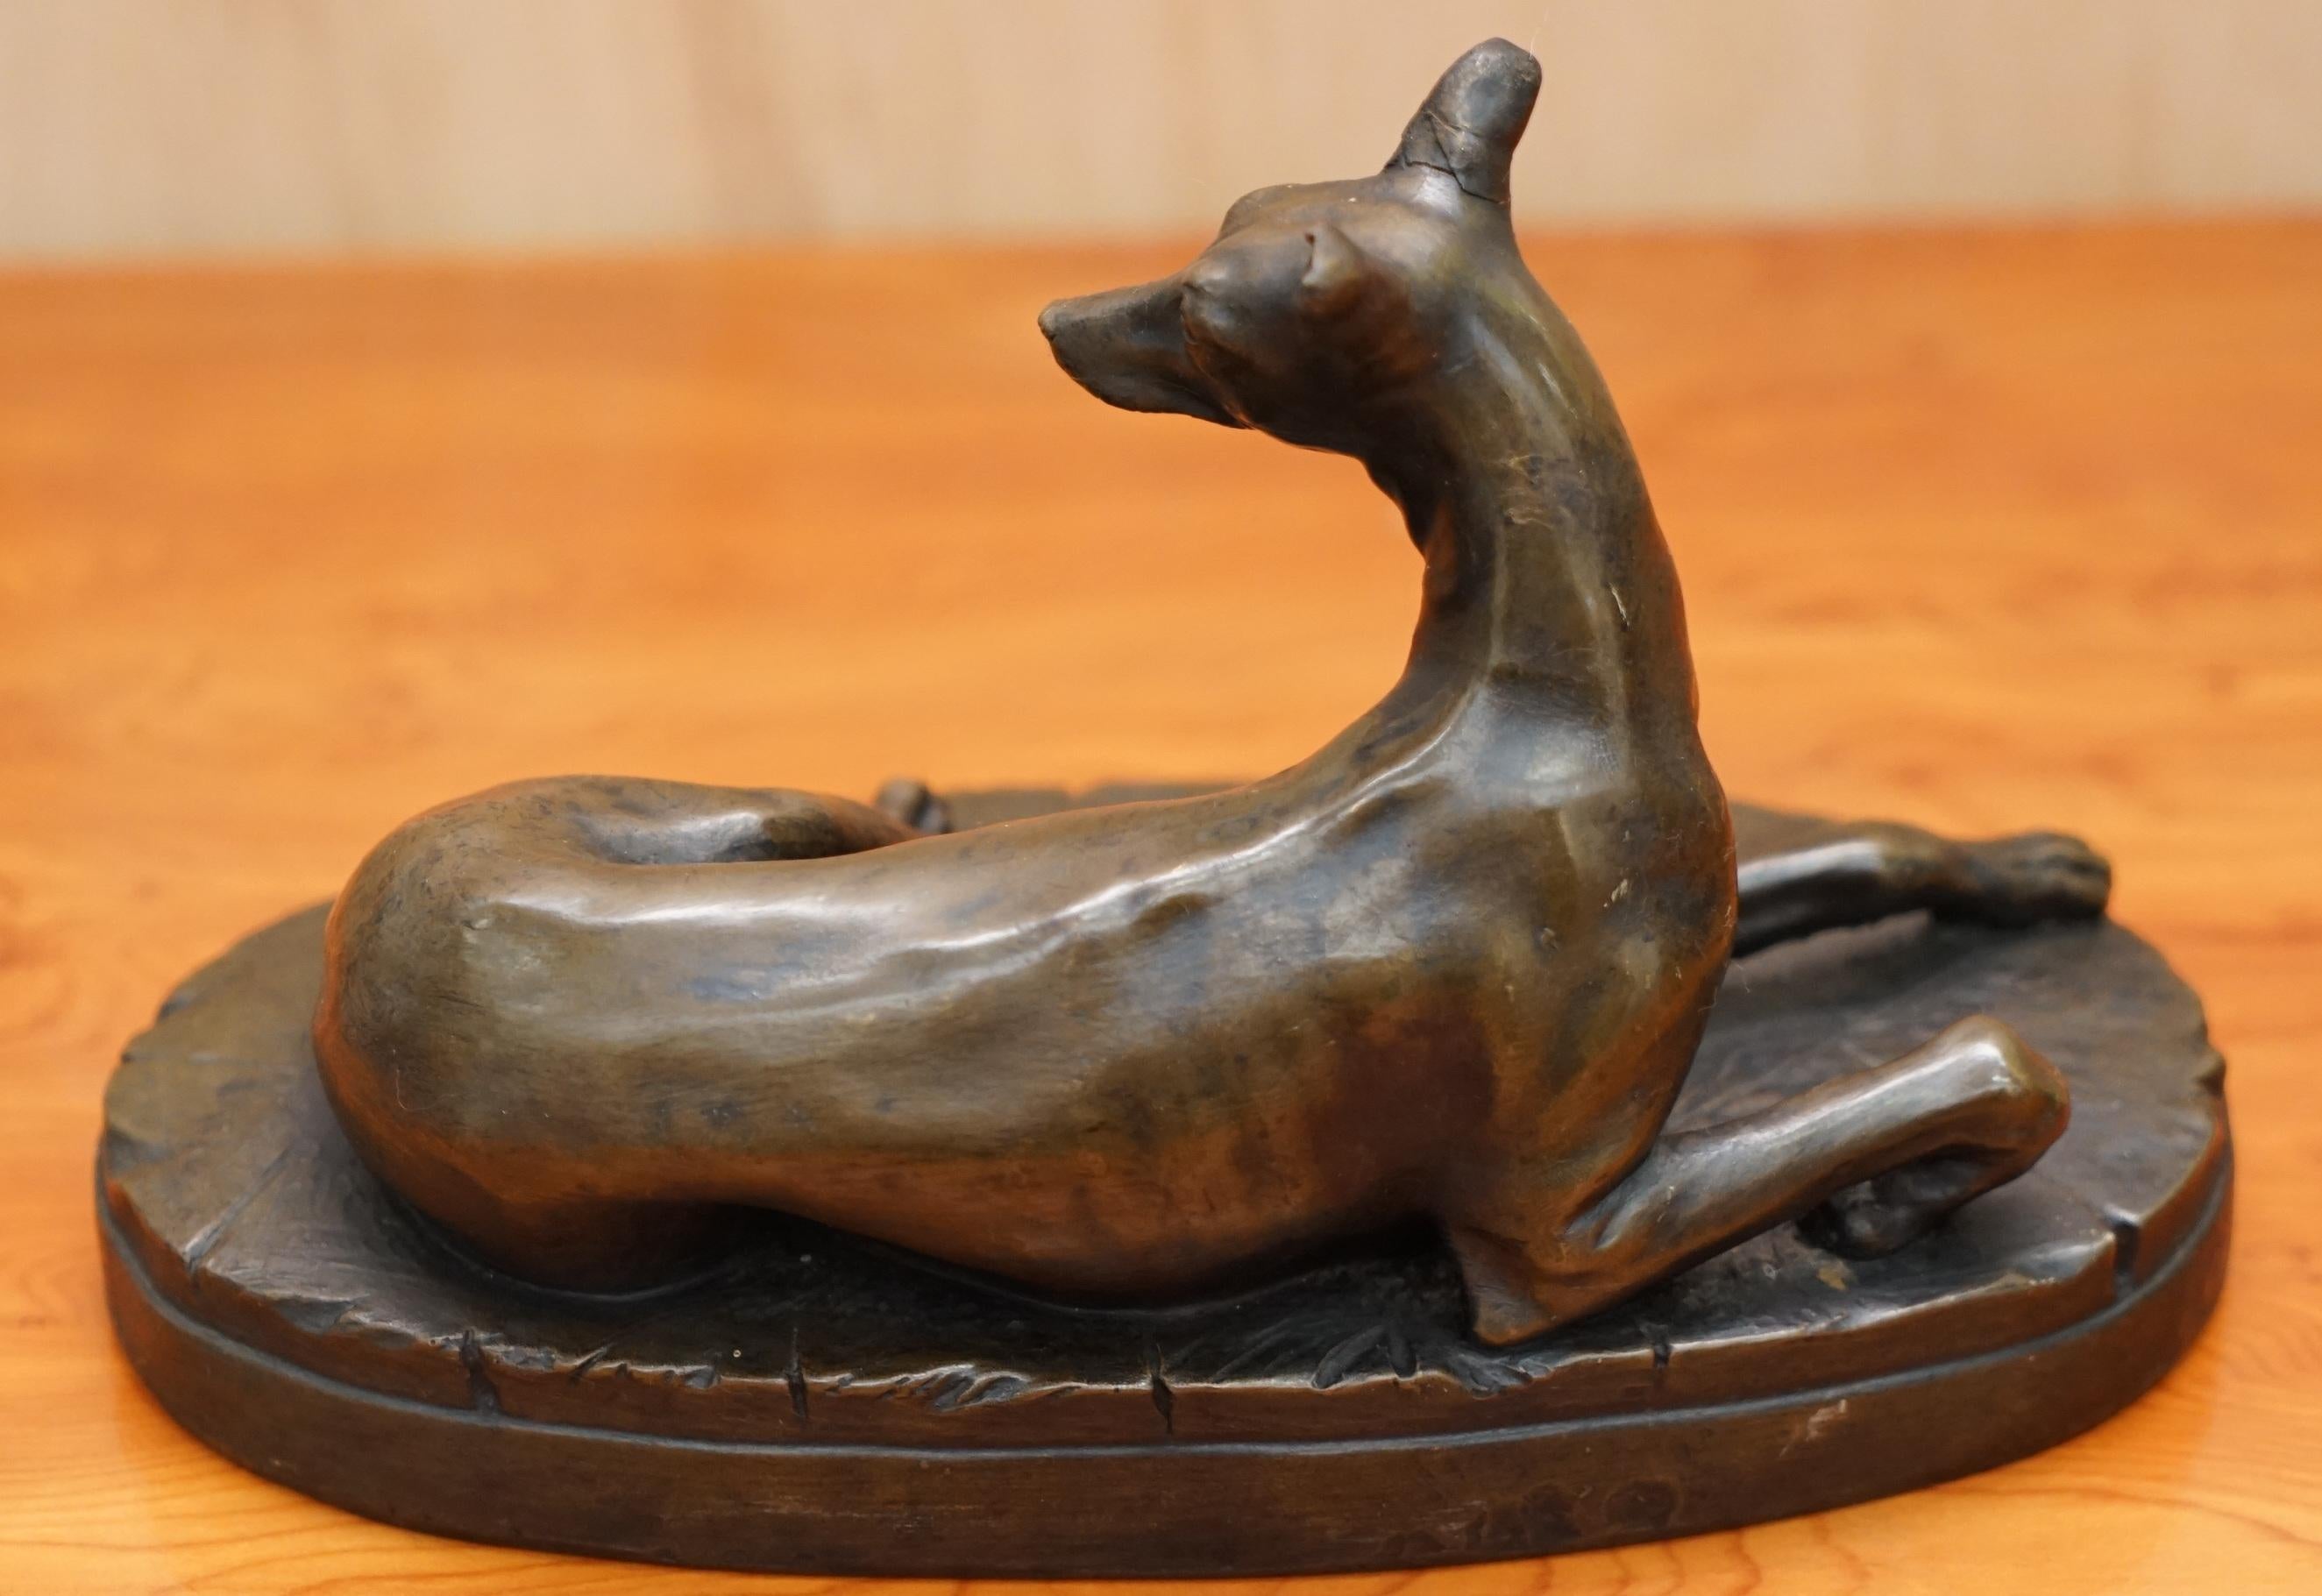 Lovely Bronze Statue of a Whippet Dog Laying Down with a Expecting Expression 2